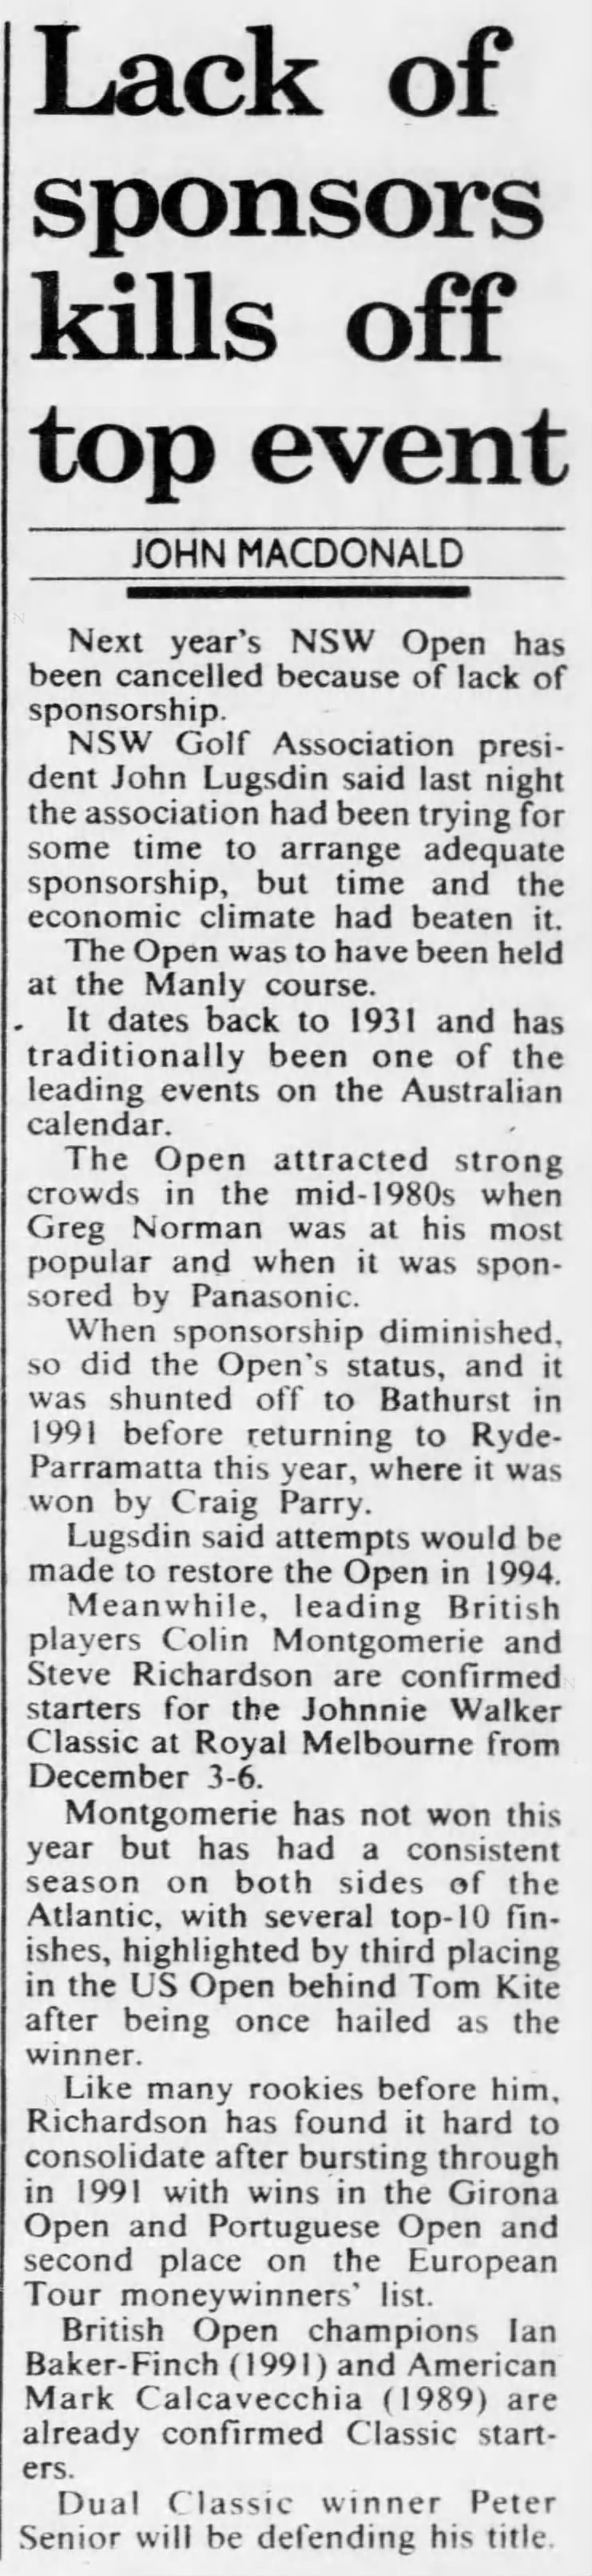 1993 NSW Open cancelled